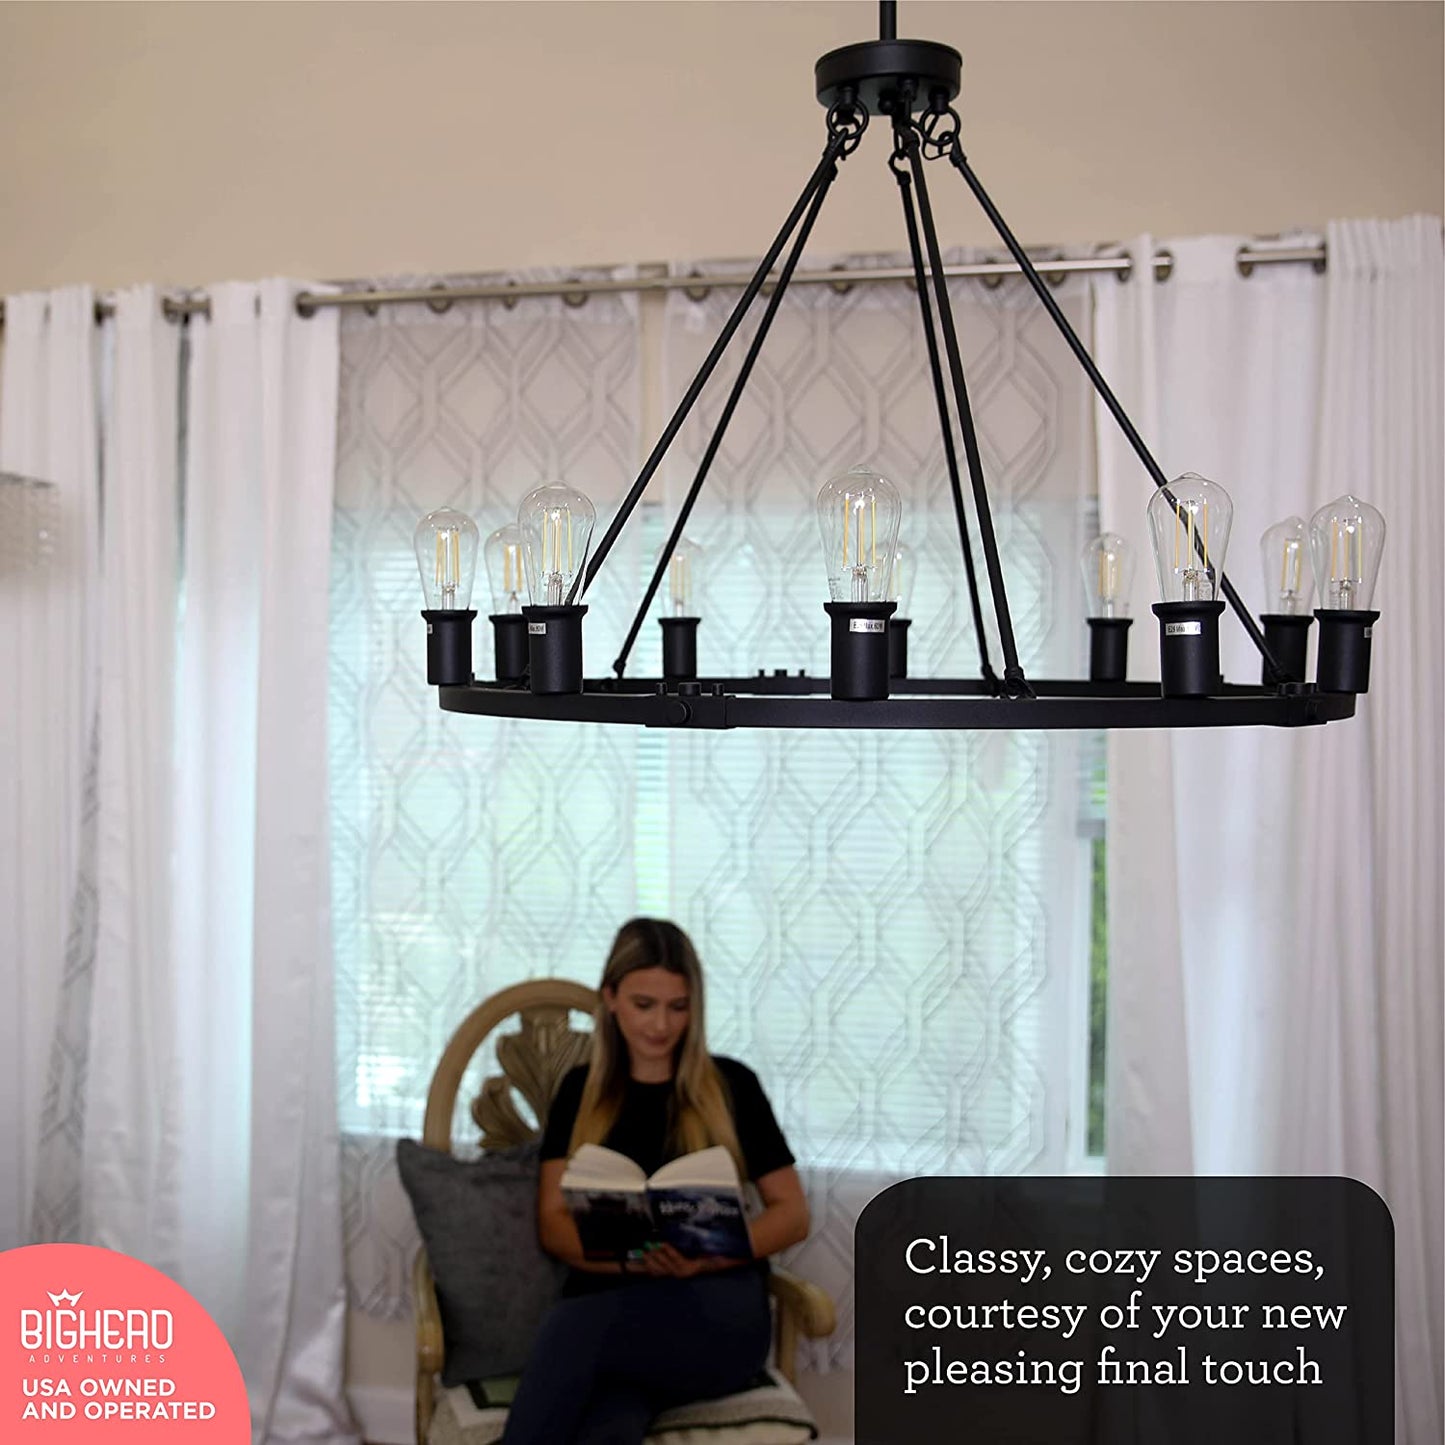 Wagon Wheel Chandelier with 10-Light Round Bulb Socket, Black Farmhouse Chandelier, Rustic Vintage Round Lighting Fixtures for Living Room, Dining Room, Kitchen Island, Foyer & Stairwell